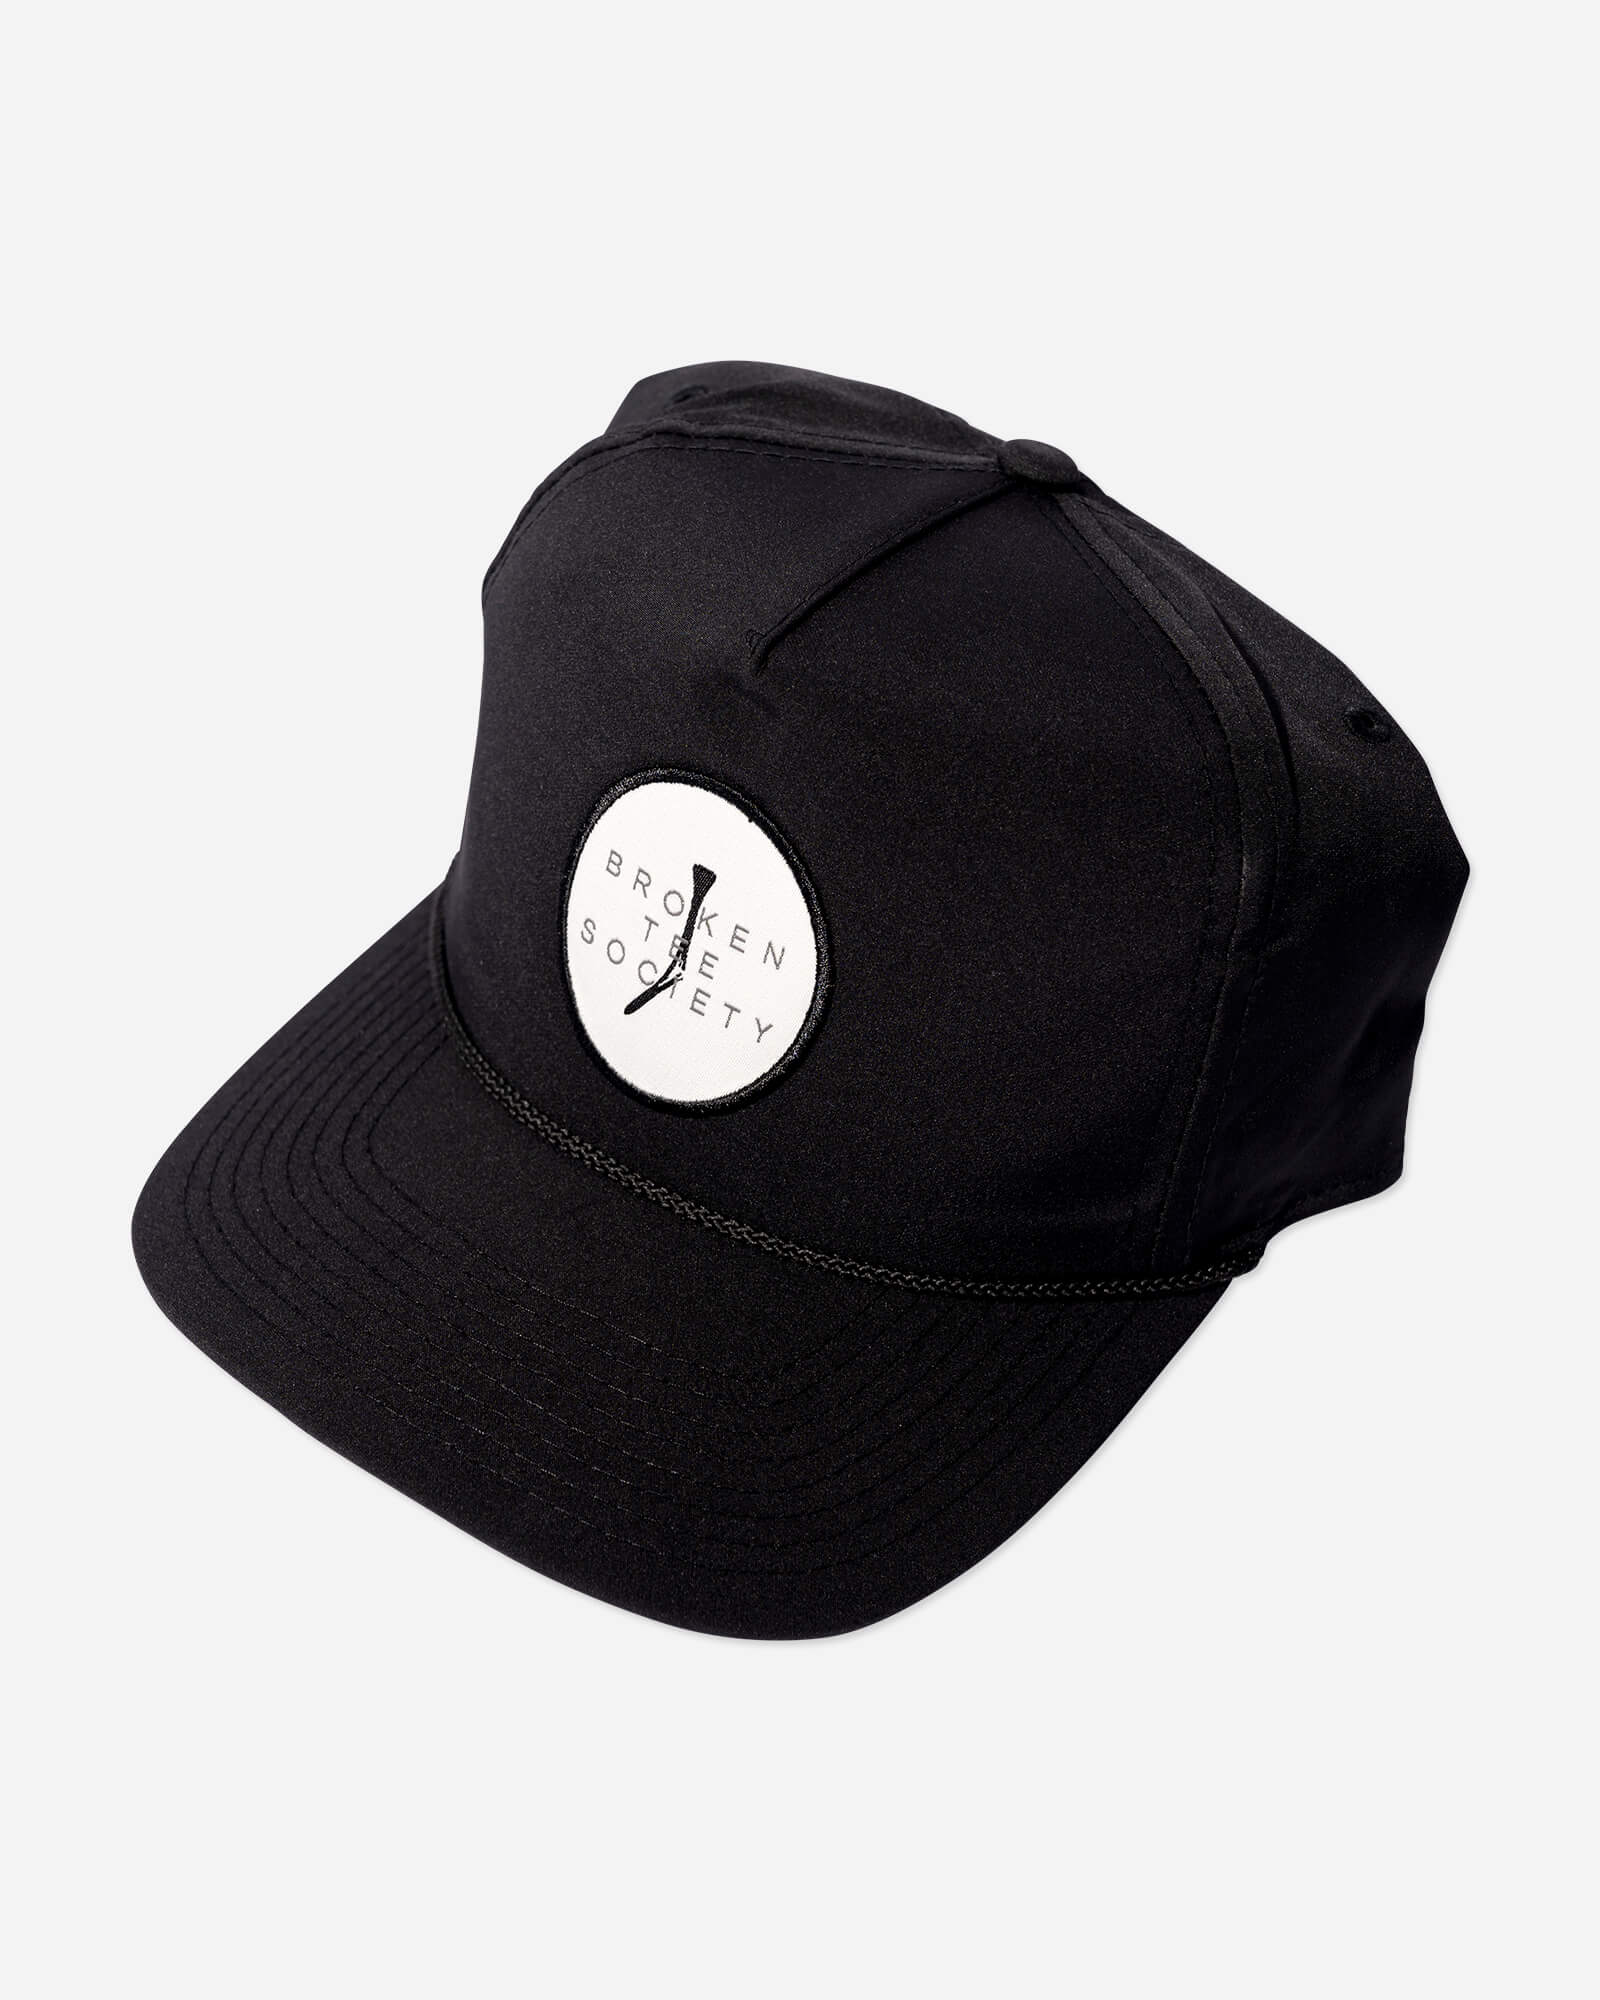 THE GOLFERS JOURNAL The Member Hat in Black